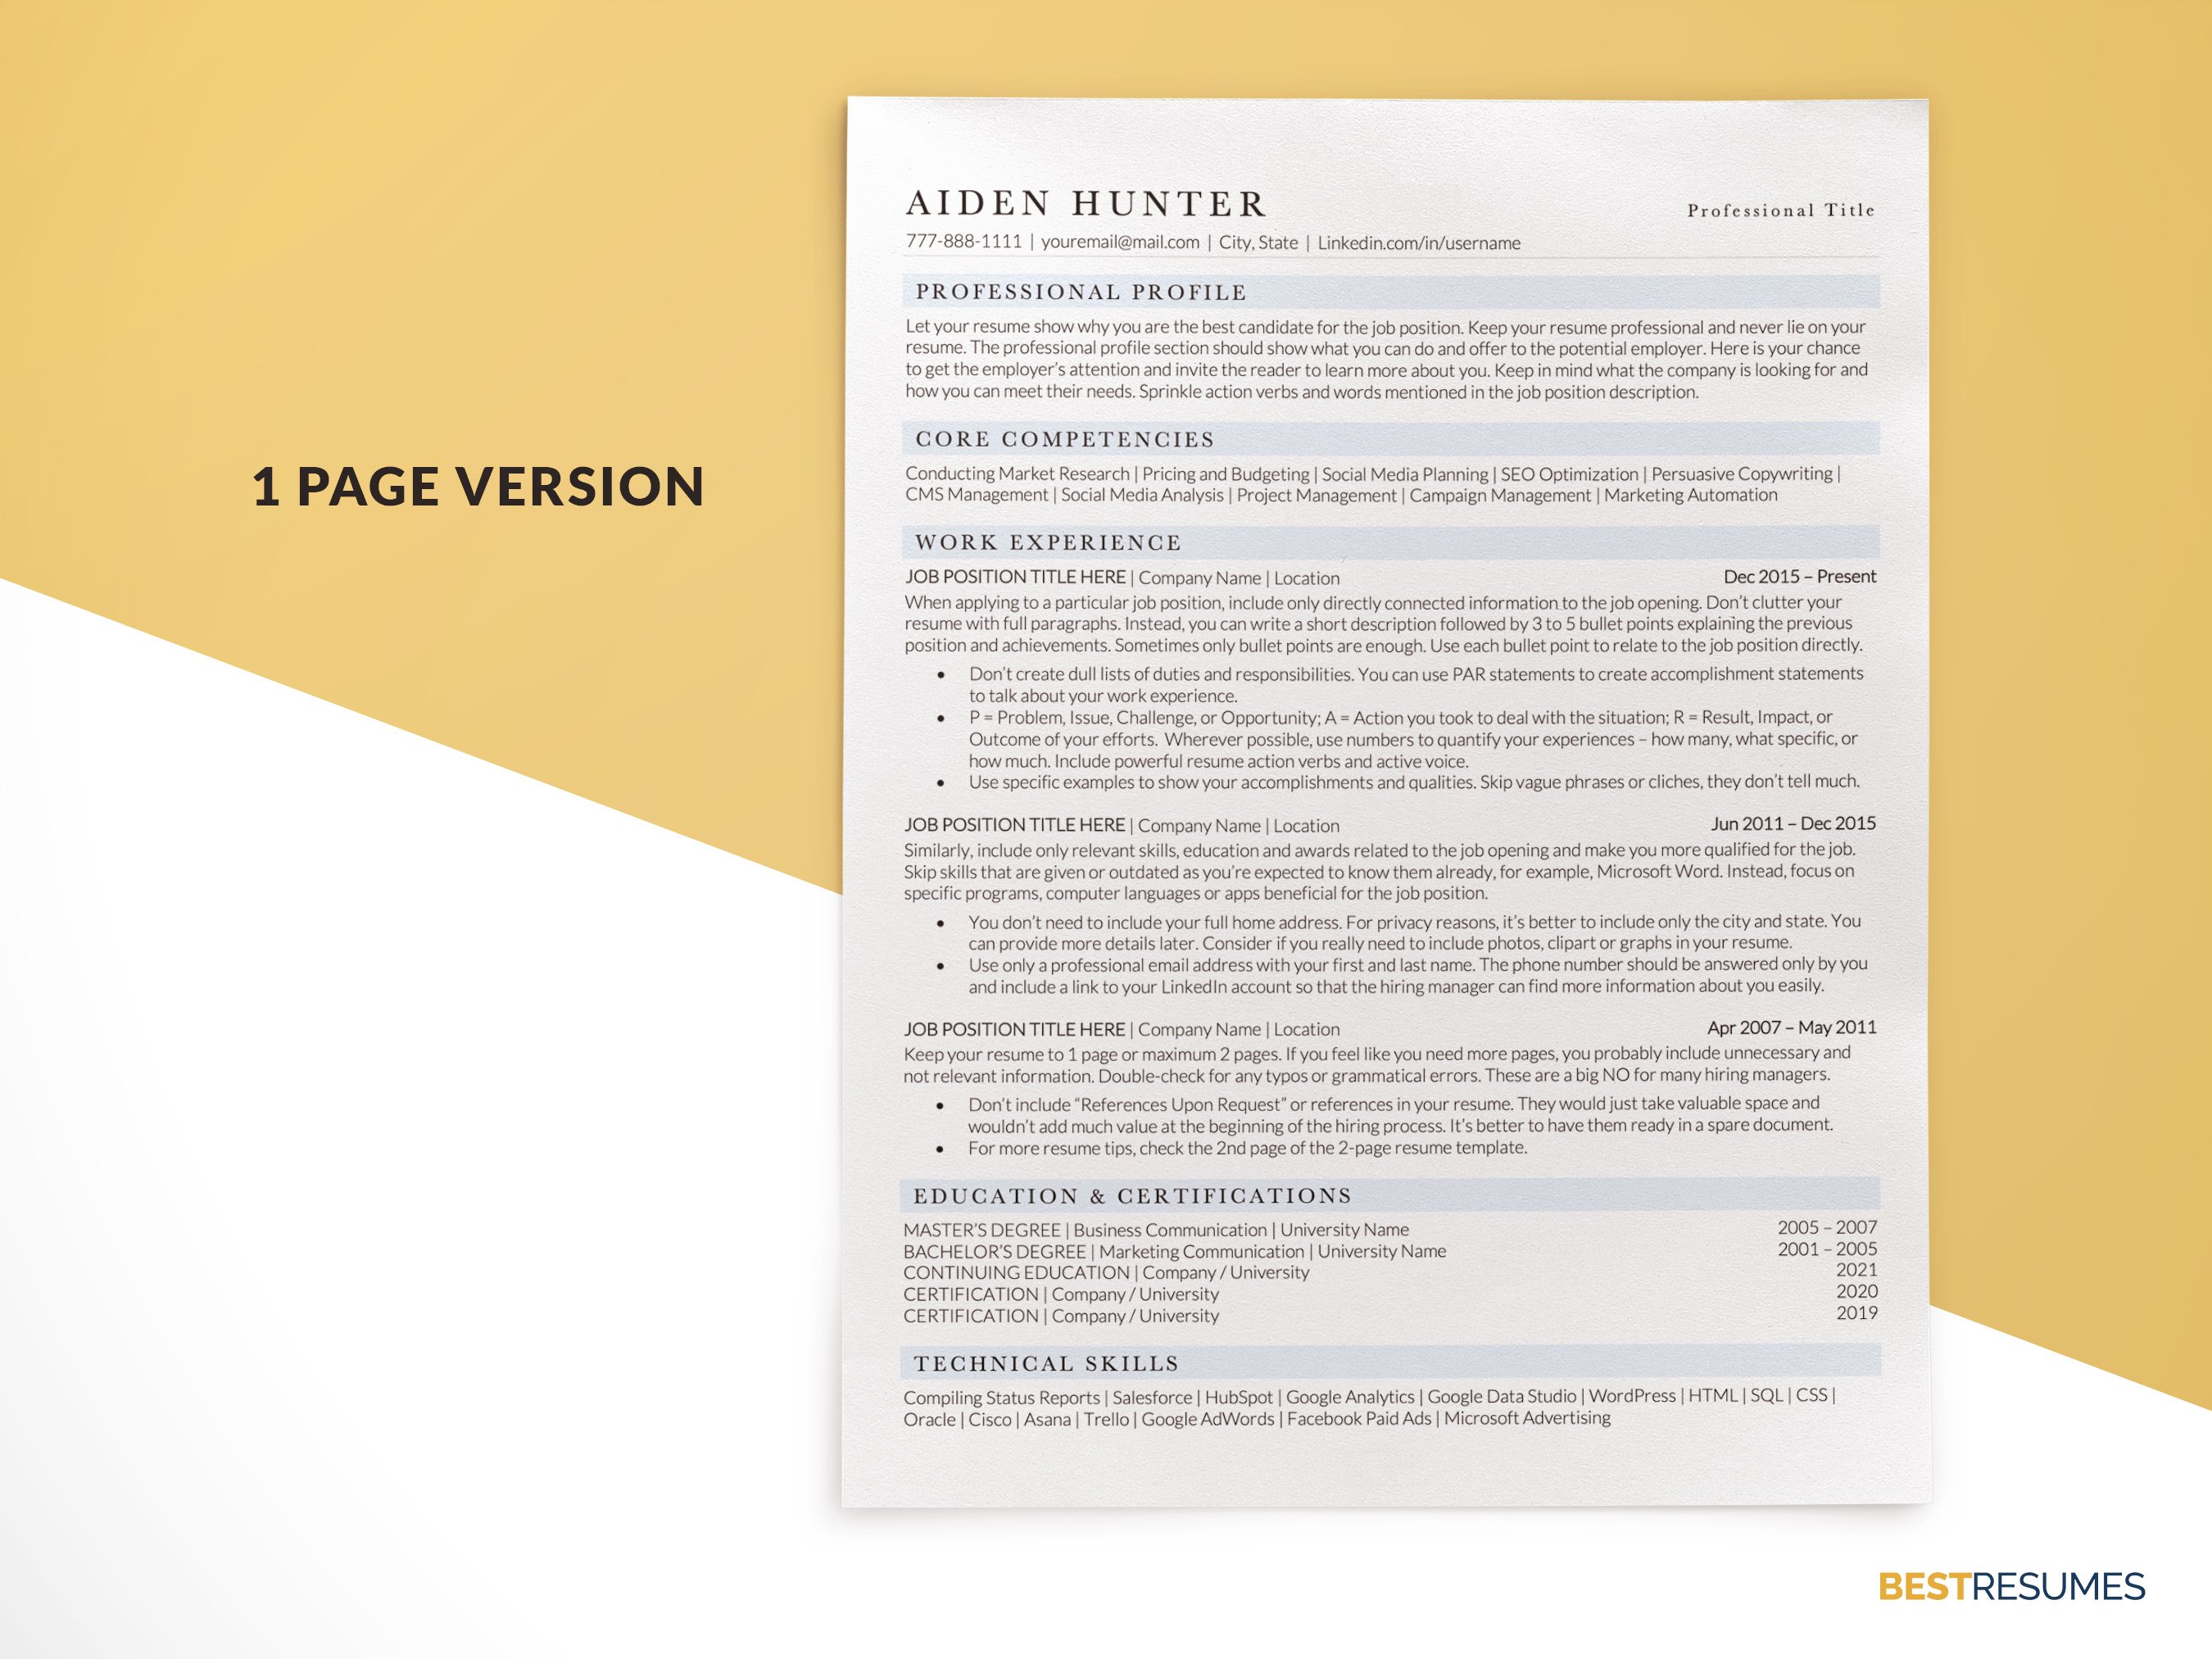 Executive CV Template Word & Pages preview image.